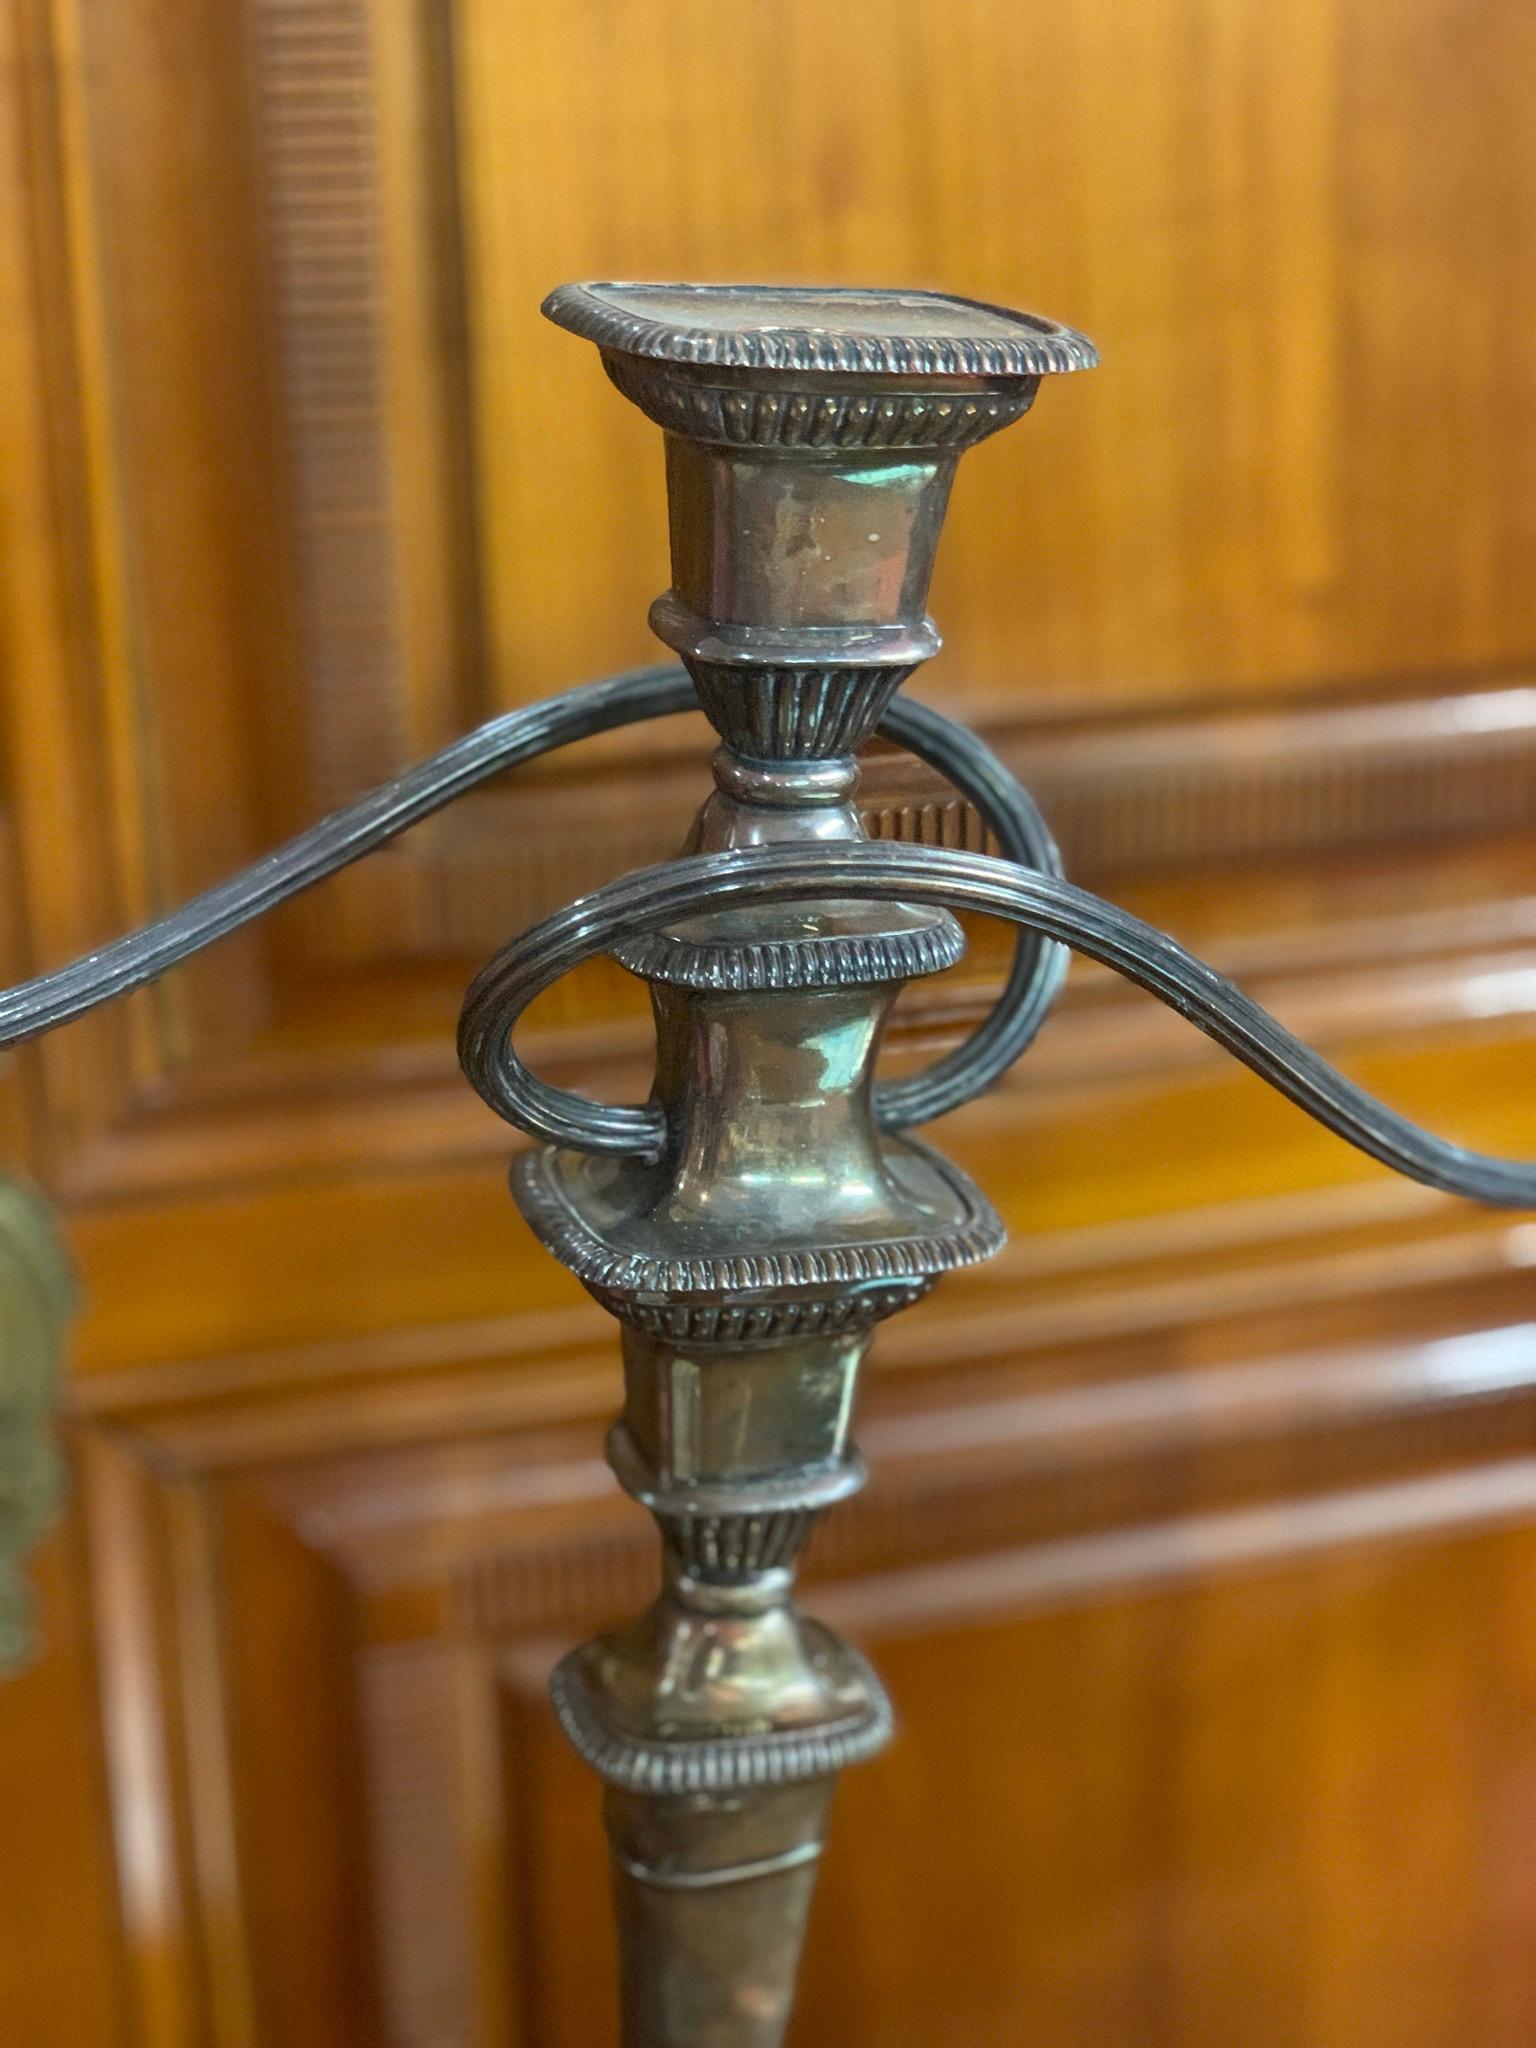 An excellent quality of antique silver candelabra with elegant classical styling. Plain clean lines with fluted tapering columns and bead borders.